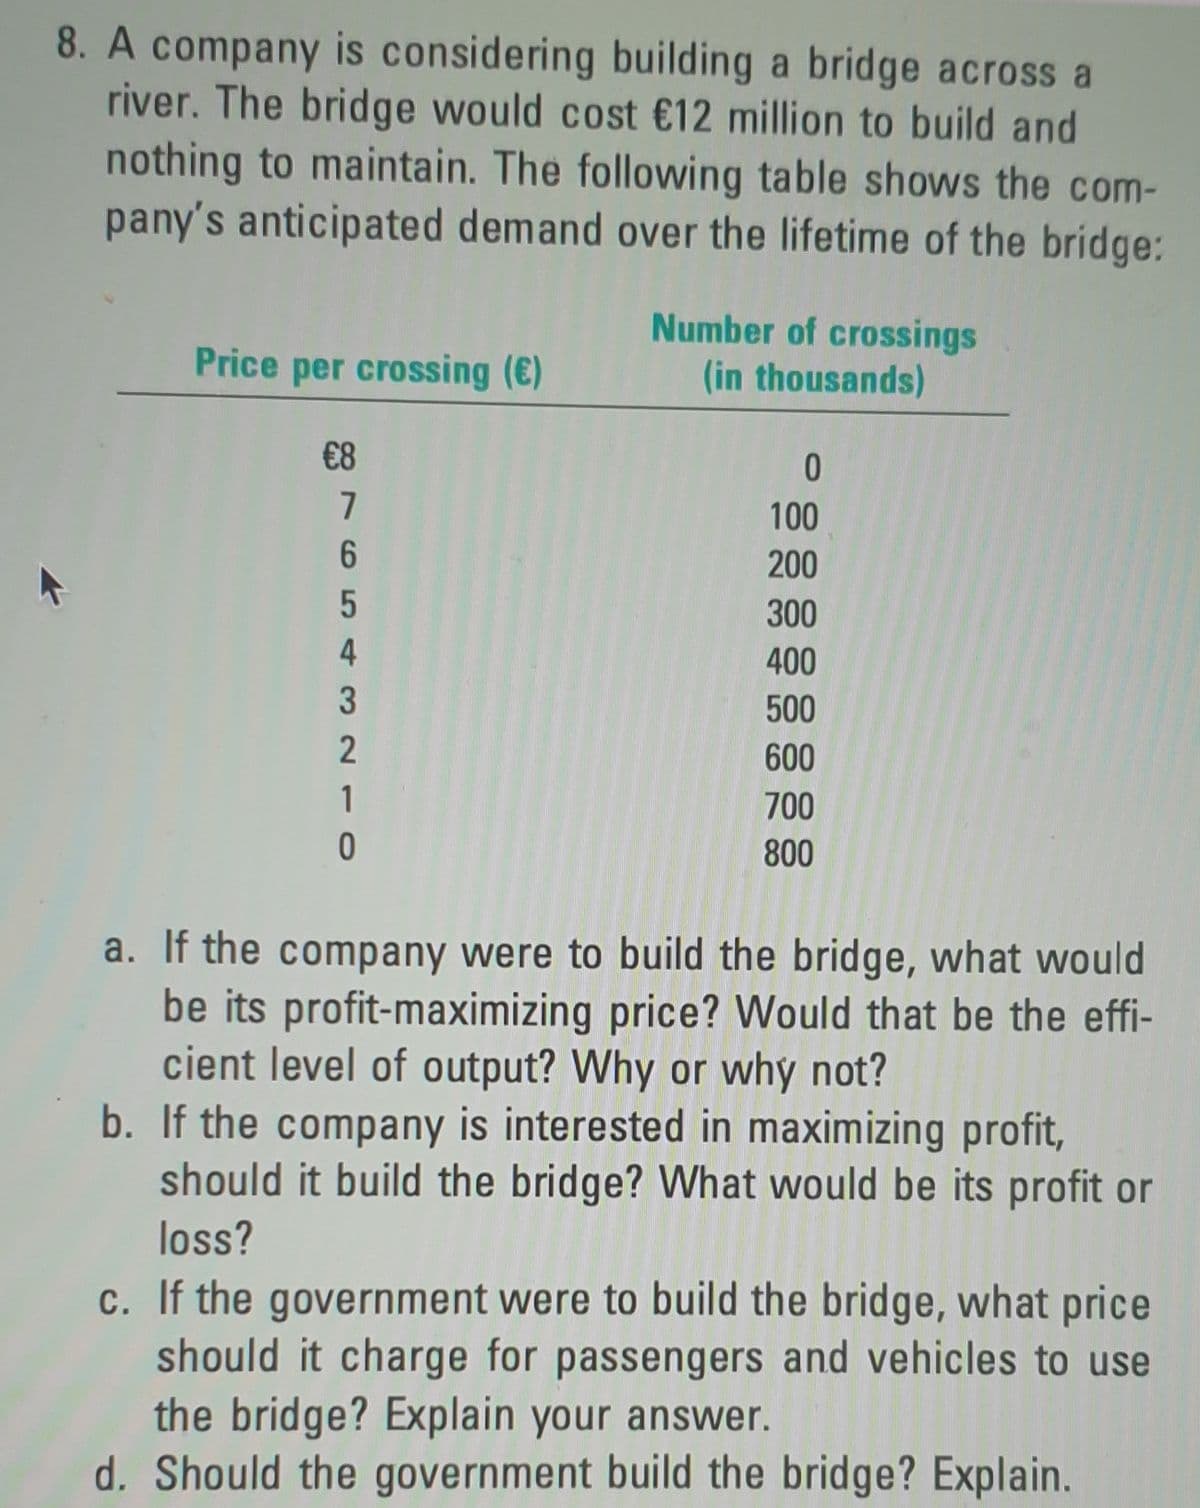 8. A company is considering building a bridge across a
river. The bridge would cost €12 million to build and
nothing to maintain. The following table shows the com-
pany's anticipated demand over the lifetime of the bridge:
Number of crossings
(in thousands)
Price per crossing (E)
€8
7
100
200
300
4
400
3
500
600
1
700
800
a. If the company were to build the bridge, what would
be its profit-maximizing price? Would that be the effi-
cient level of output? Why or why not?
b. If the company is interested in maximizing profit,
should it build the bridge? What would be its profit or
loss?
c. If the government were to build the bridge, what price
should it charge for passengers and vehicles to use
the bridge? Explain your answer.
d. Should the government build the bridge? Explain.
